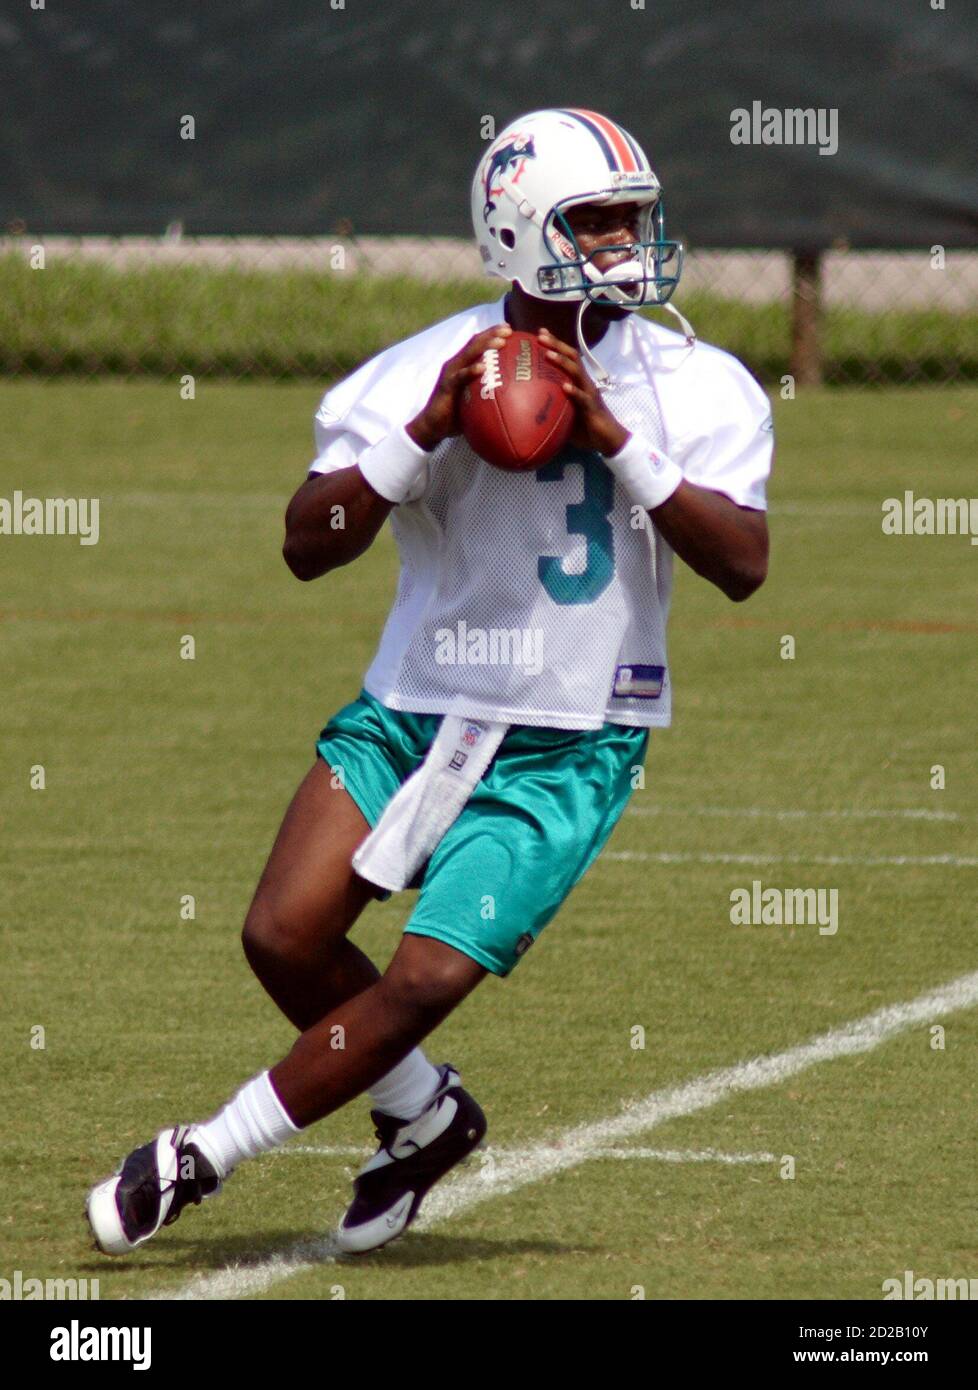 Miami Dolphins rookie un-drafted quarterback Marcus Vick drops back to pass  during mini camp in Davie, Florida May 5, 2006. Vick is the younger brother  of Atlanta Falcons star quarterback Michael Vick.